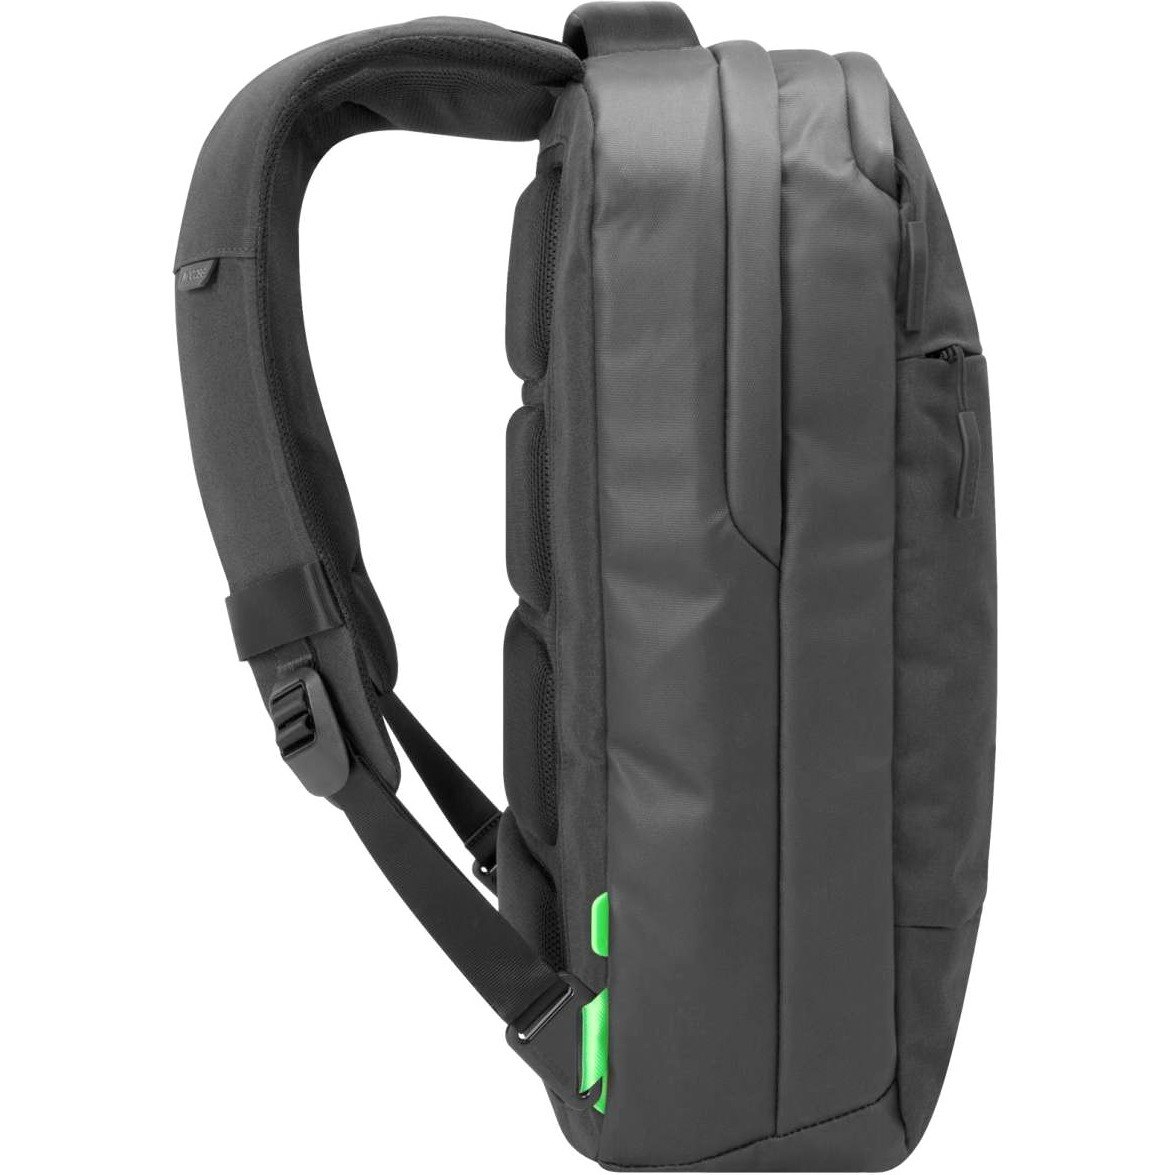 Incase City Compact Backpack- Black